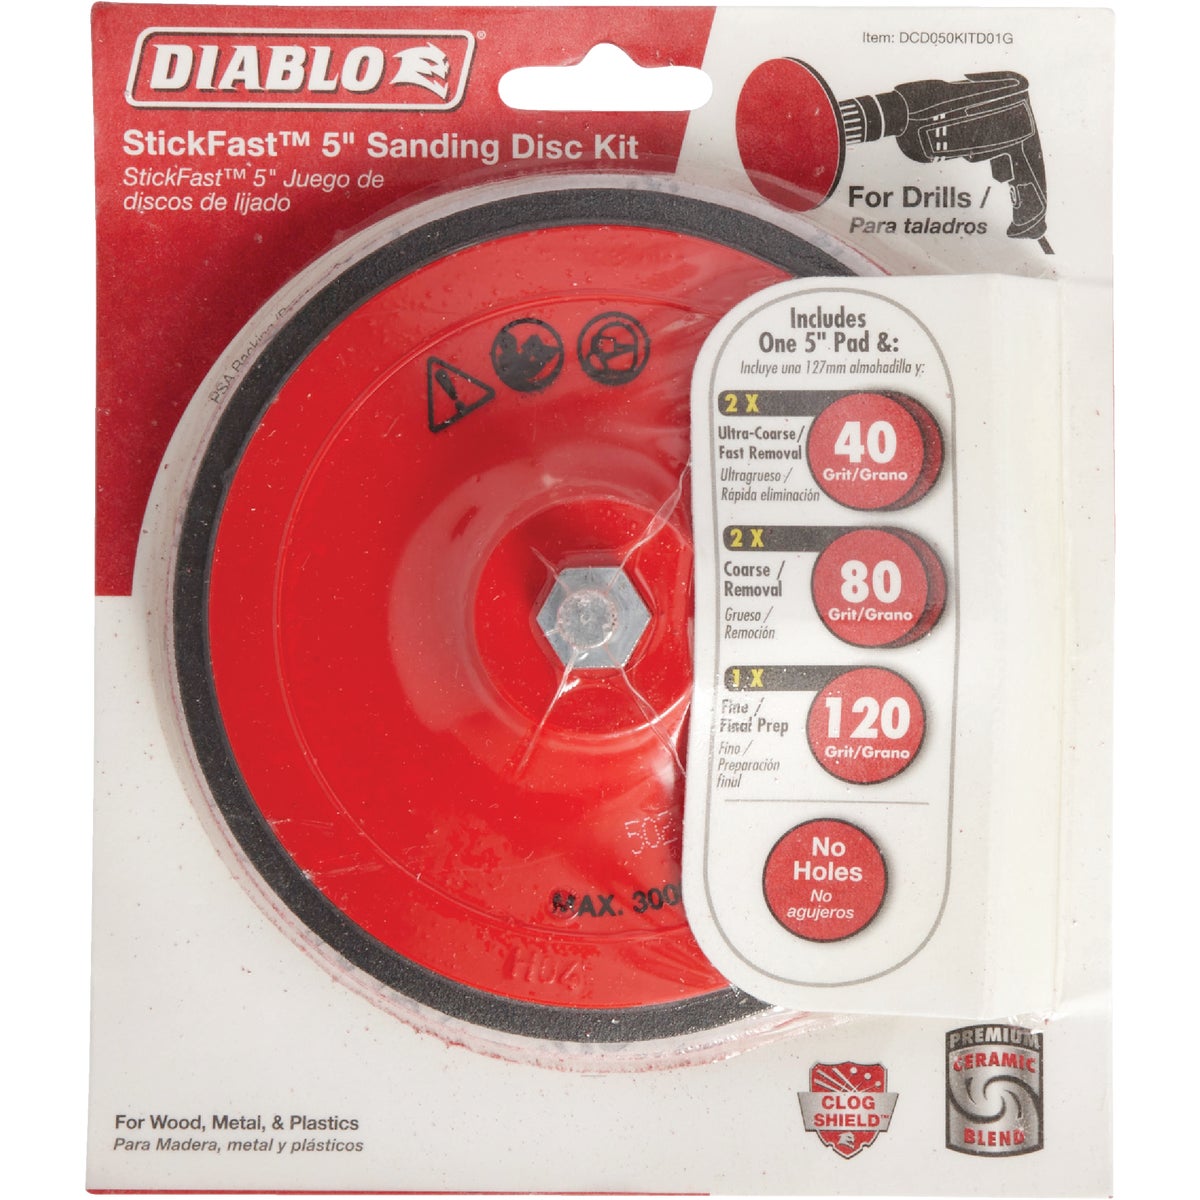 Item 302981, Premium sanding disc kit with StickFast backing includes assorted sanding 